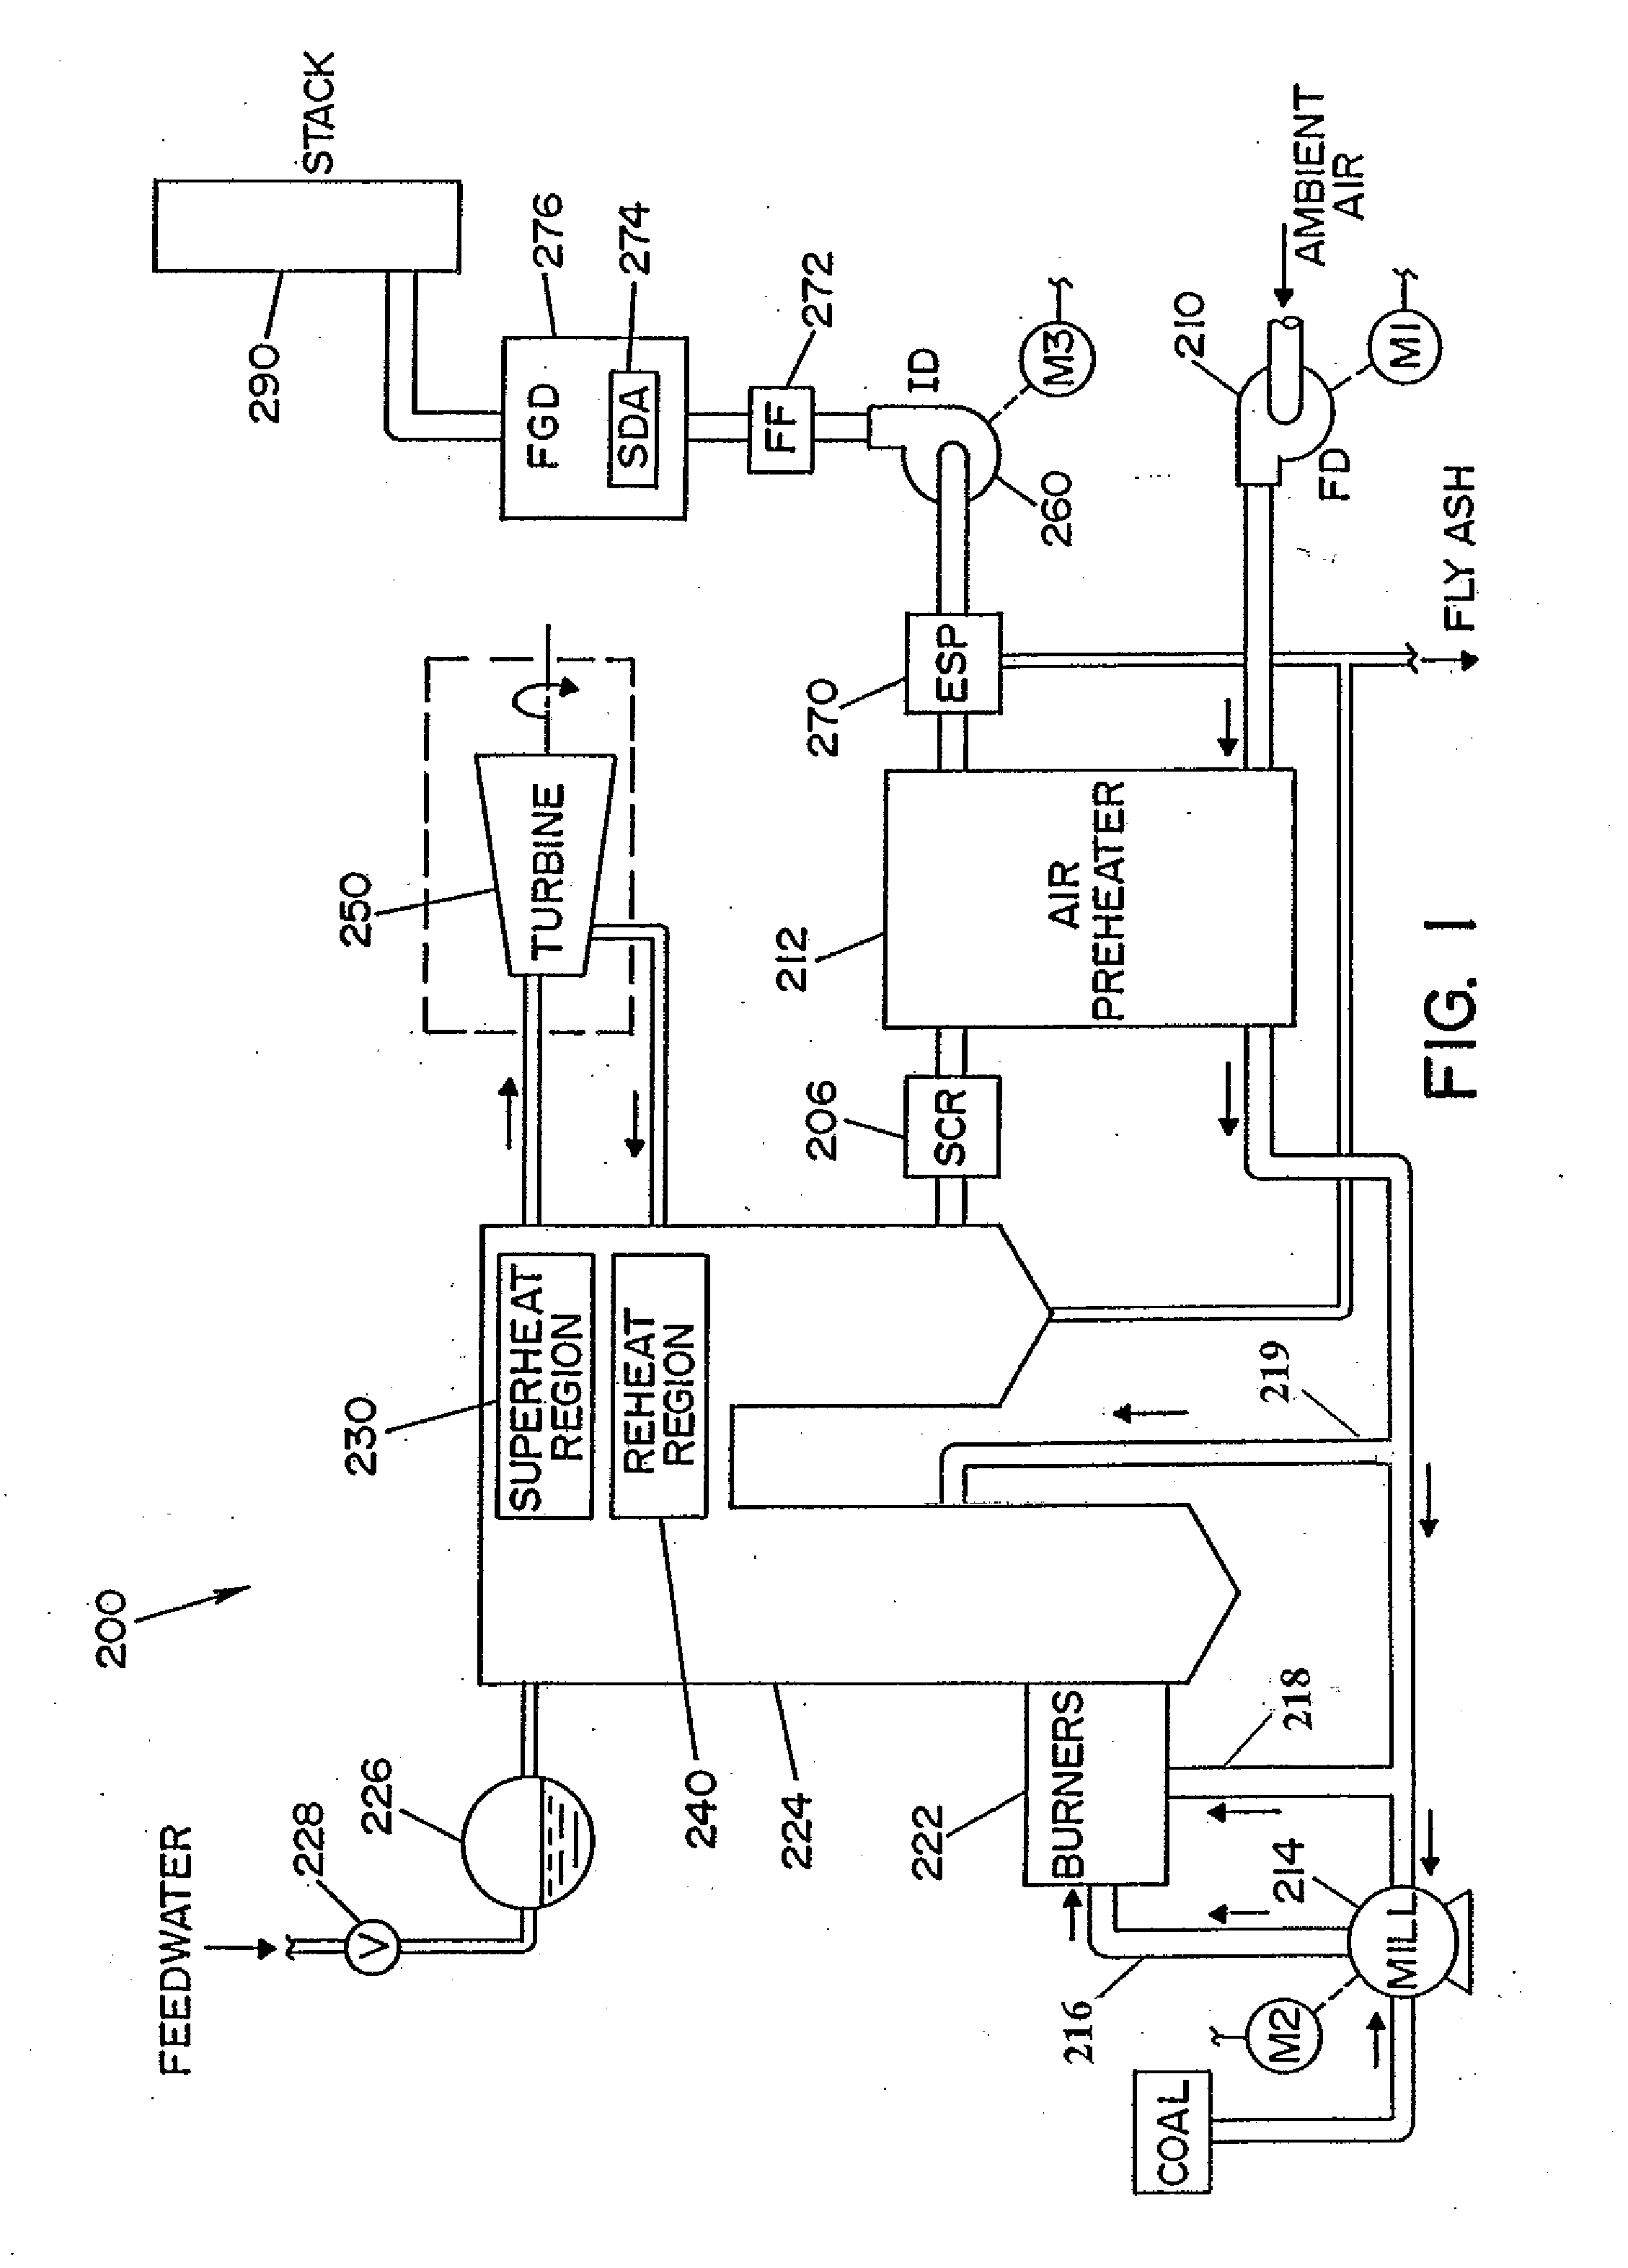 System for optimizing oxygen in a boiler